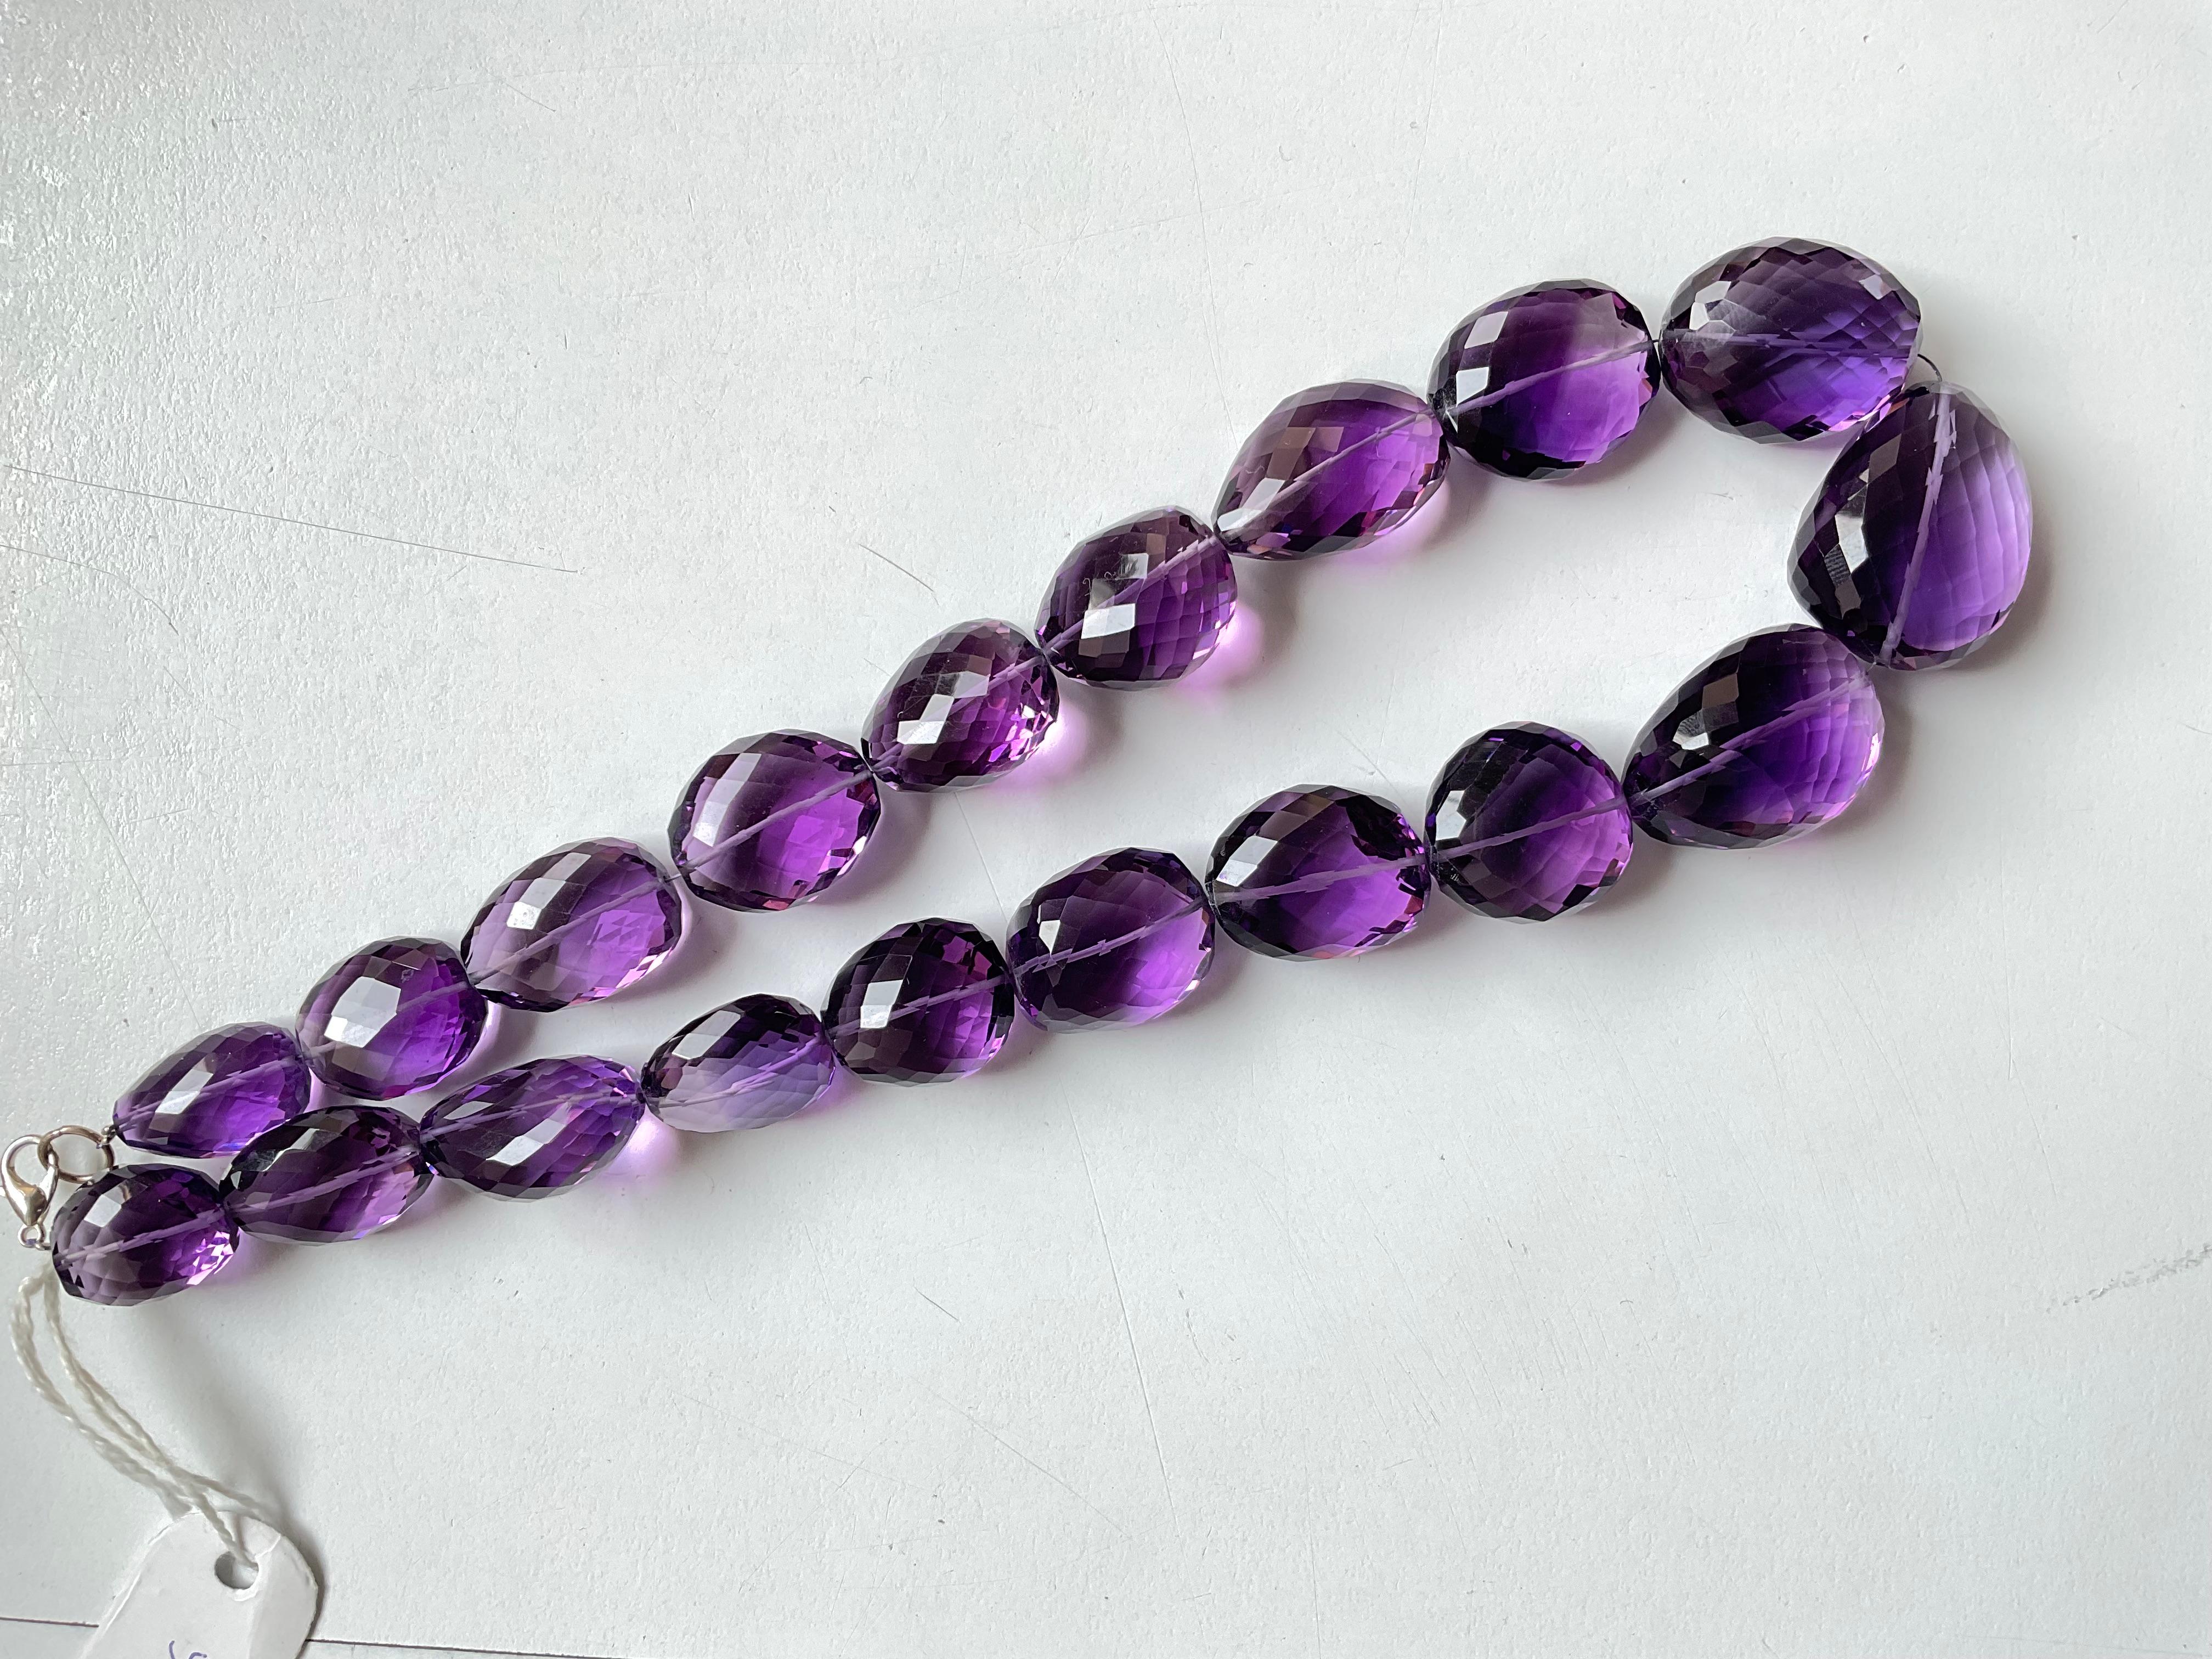 Amethyst Quartz Beaded Tumbled Faceted high Jewelry Necklace Gem Quality
Size :  19x16x13 To 30x24x16 MM 
Weight : 759.05 Carats
Quantity - 1 Strand
